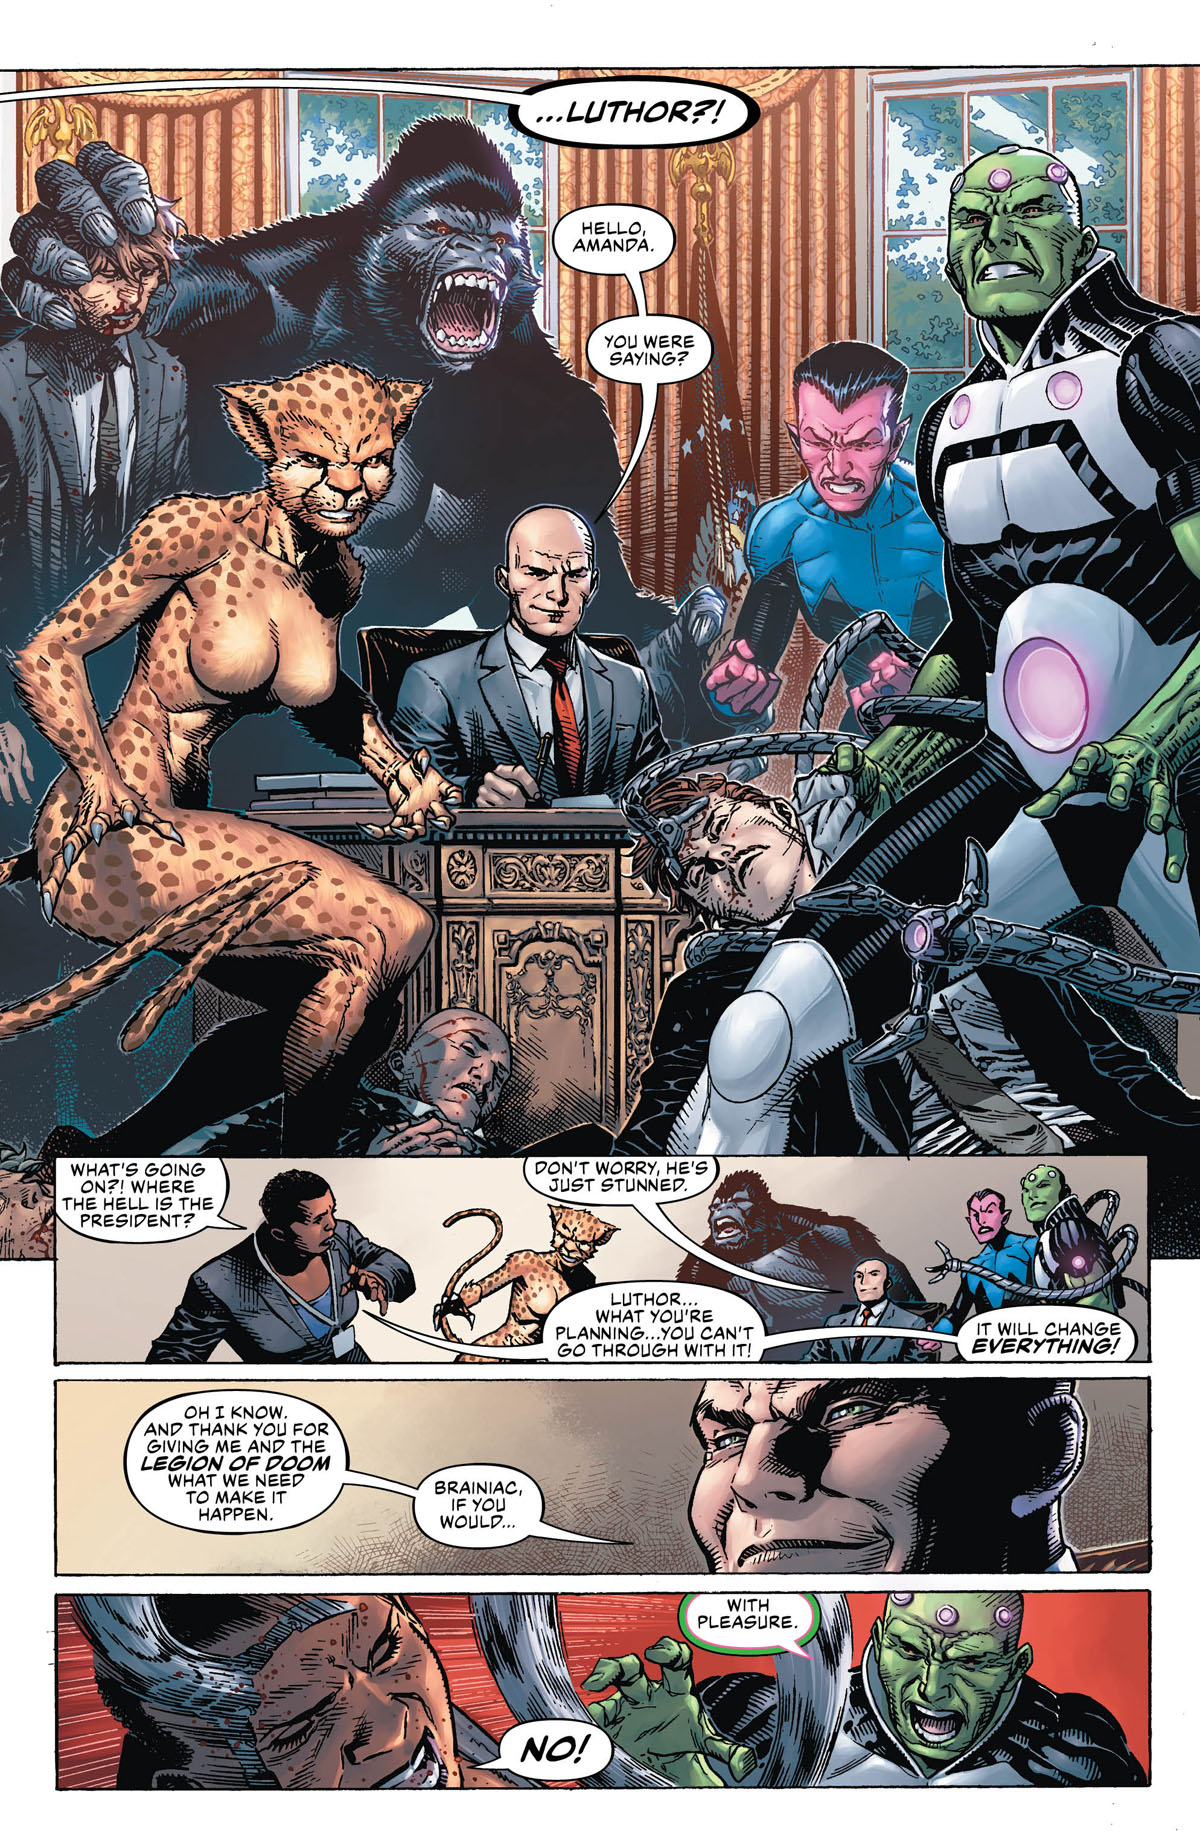 DC's Year of the Villain #1 page 2